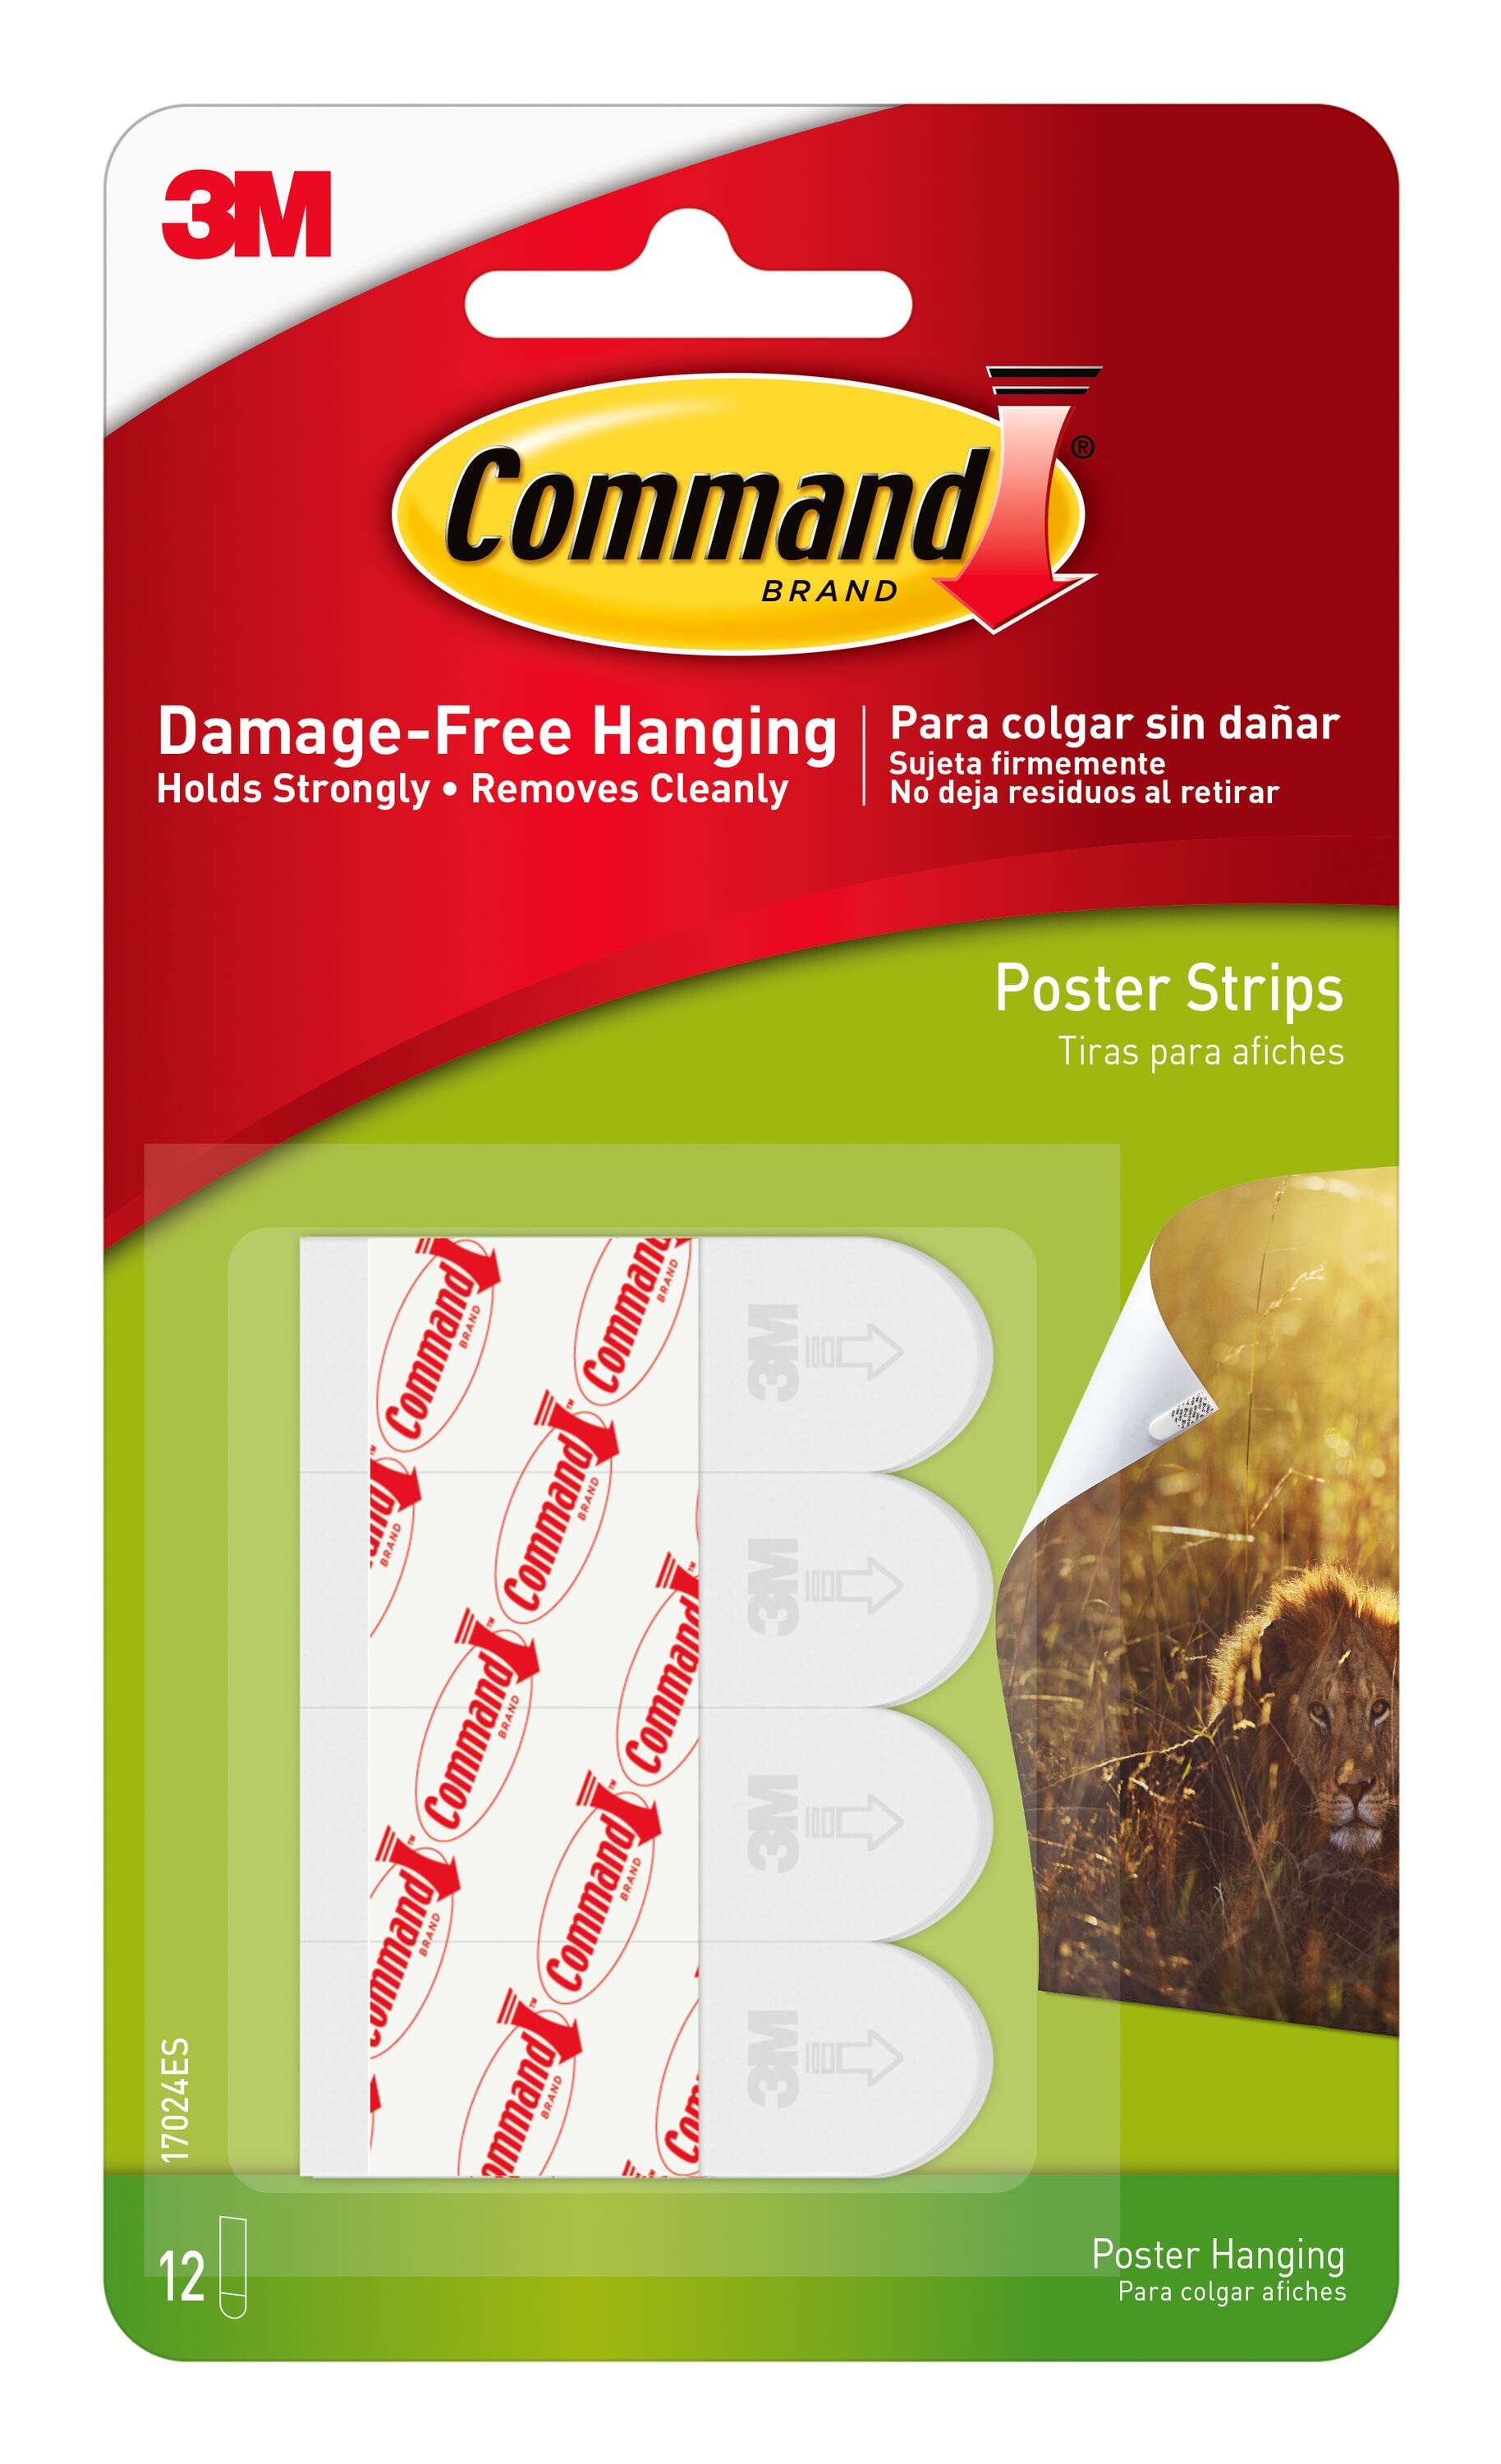 Medium Small For Damage Free Picture Poster Hanging 3M Command Strips Large 